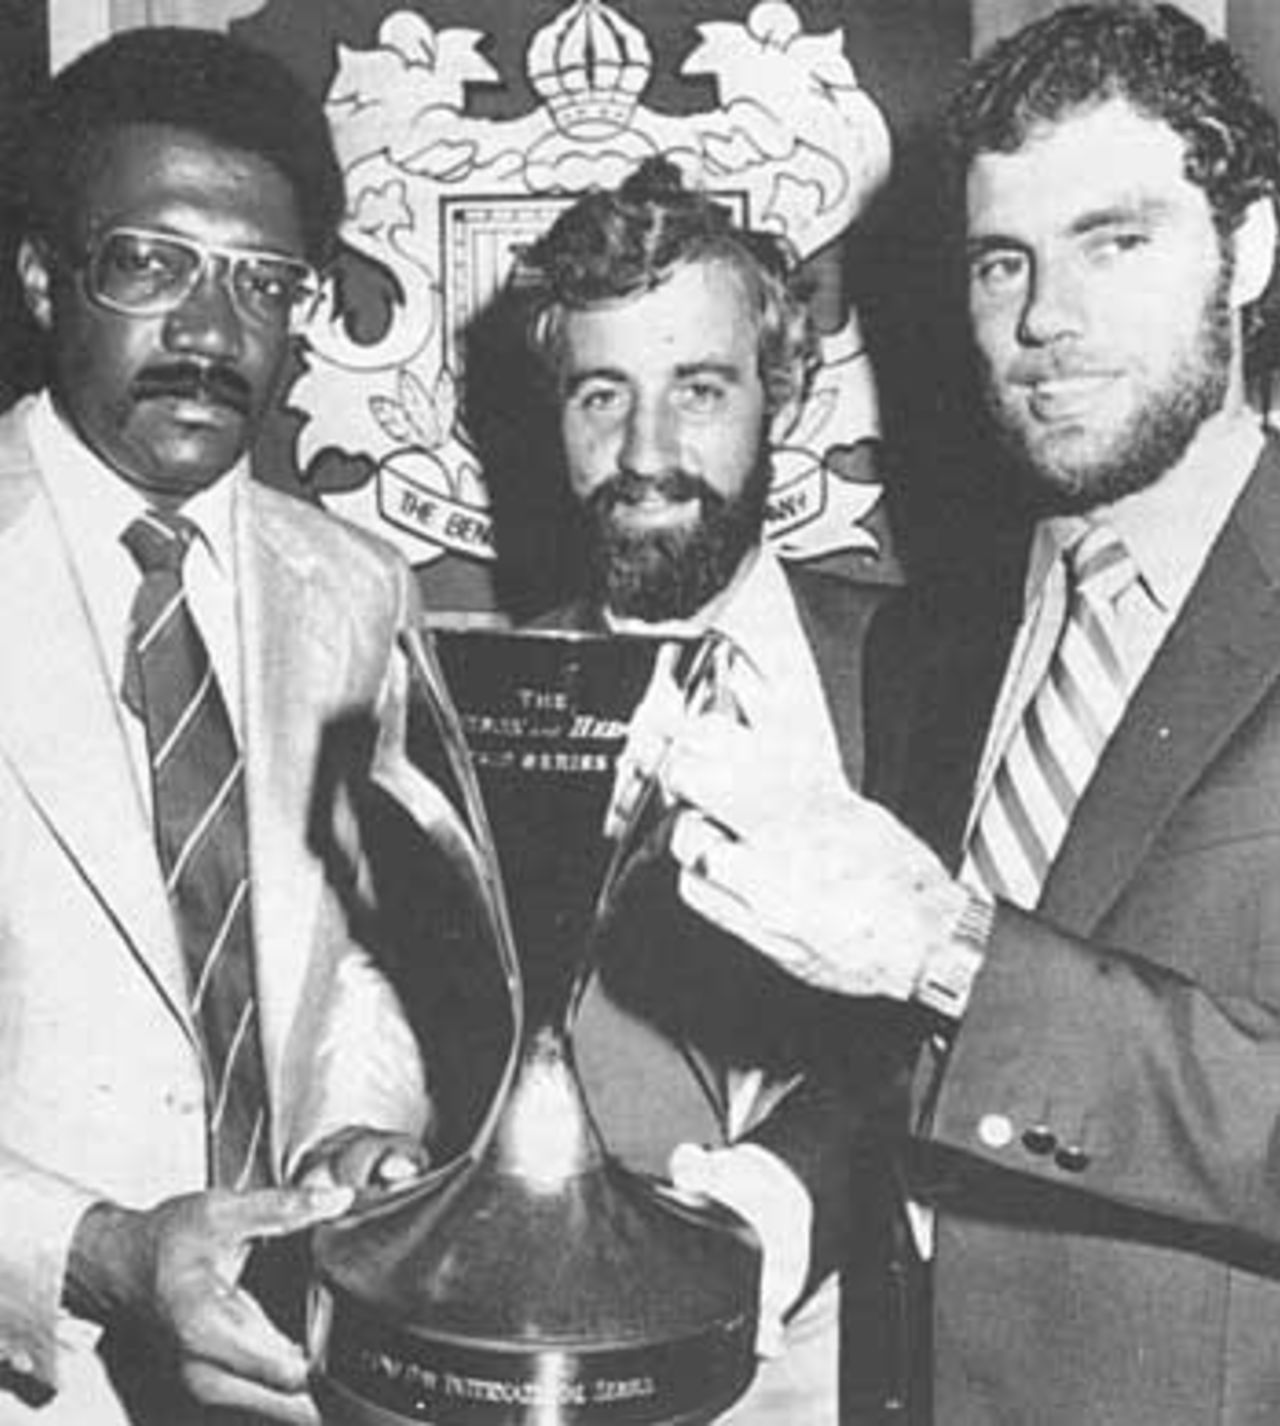 Captains Clive Lloyd, Mike Brearley and Greg Chappell admire the trophy, Benson & Hedges World Series Cup, 1979-80, Australia